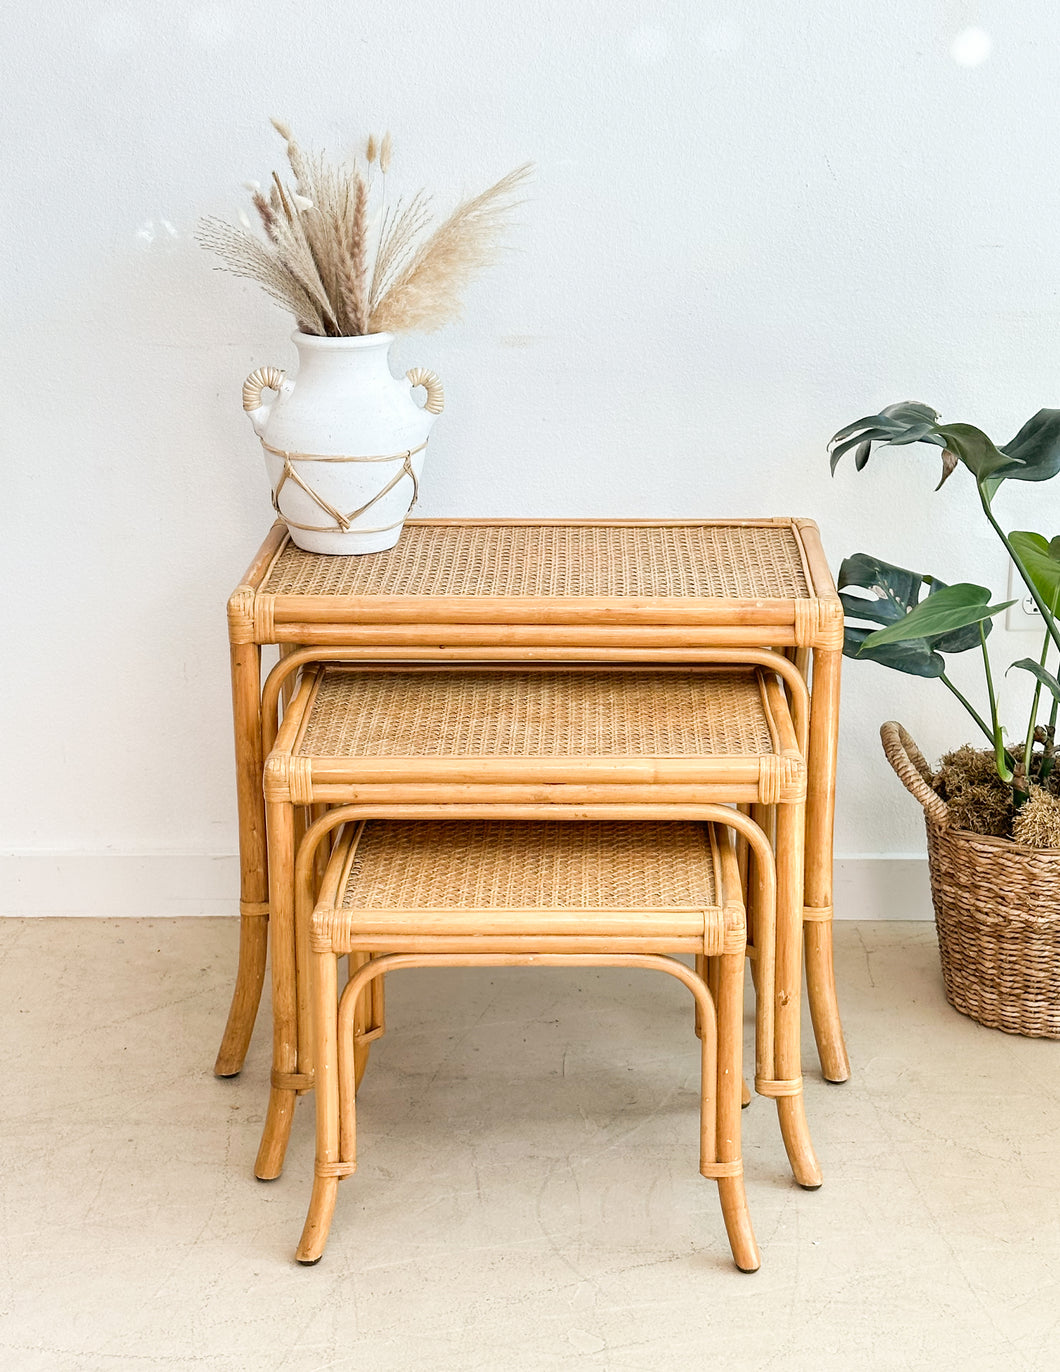 Set of Cane Nesting Tables